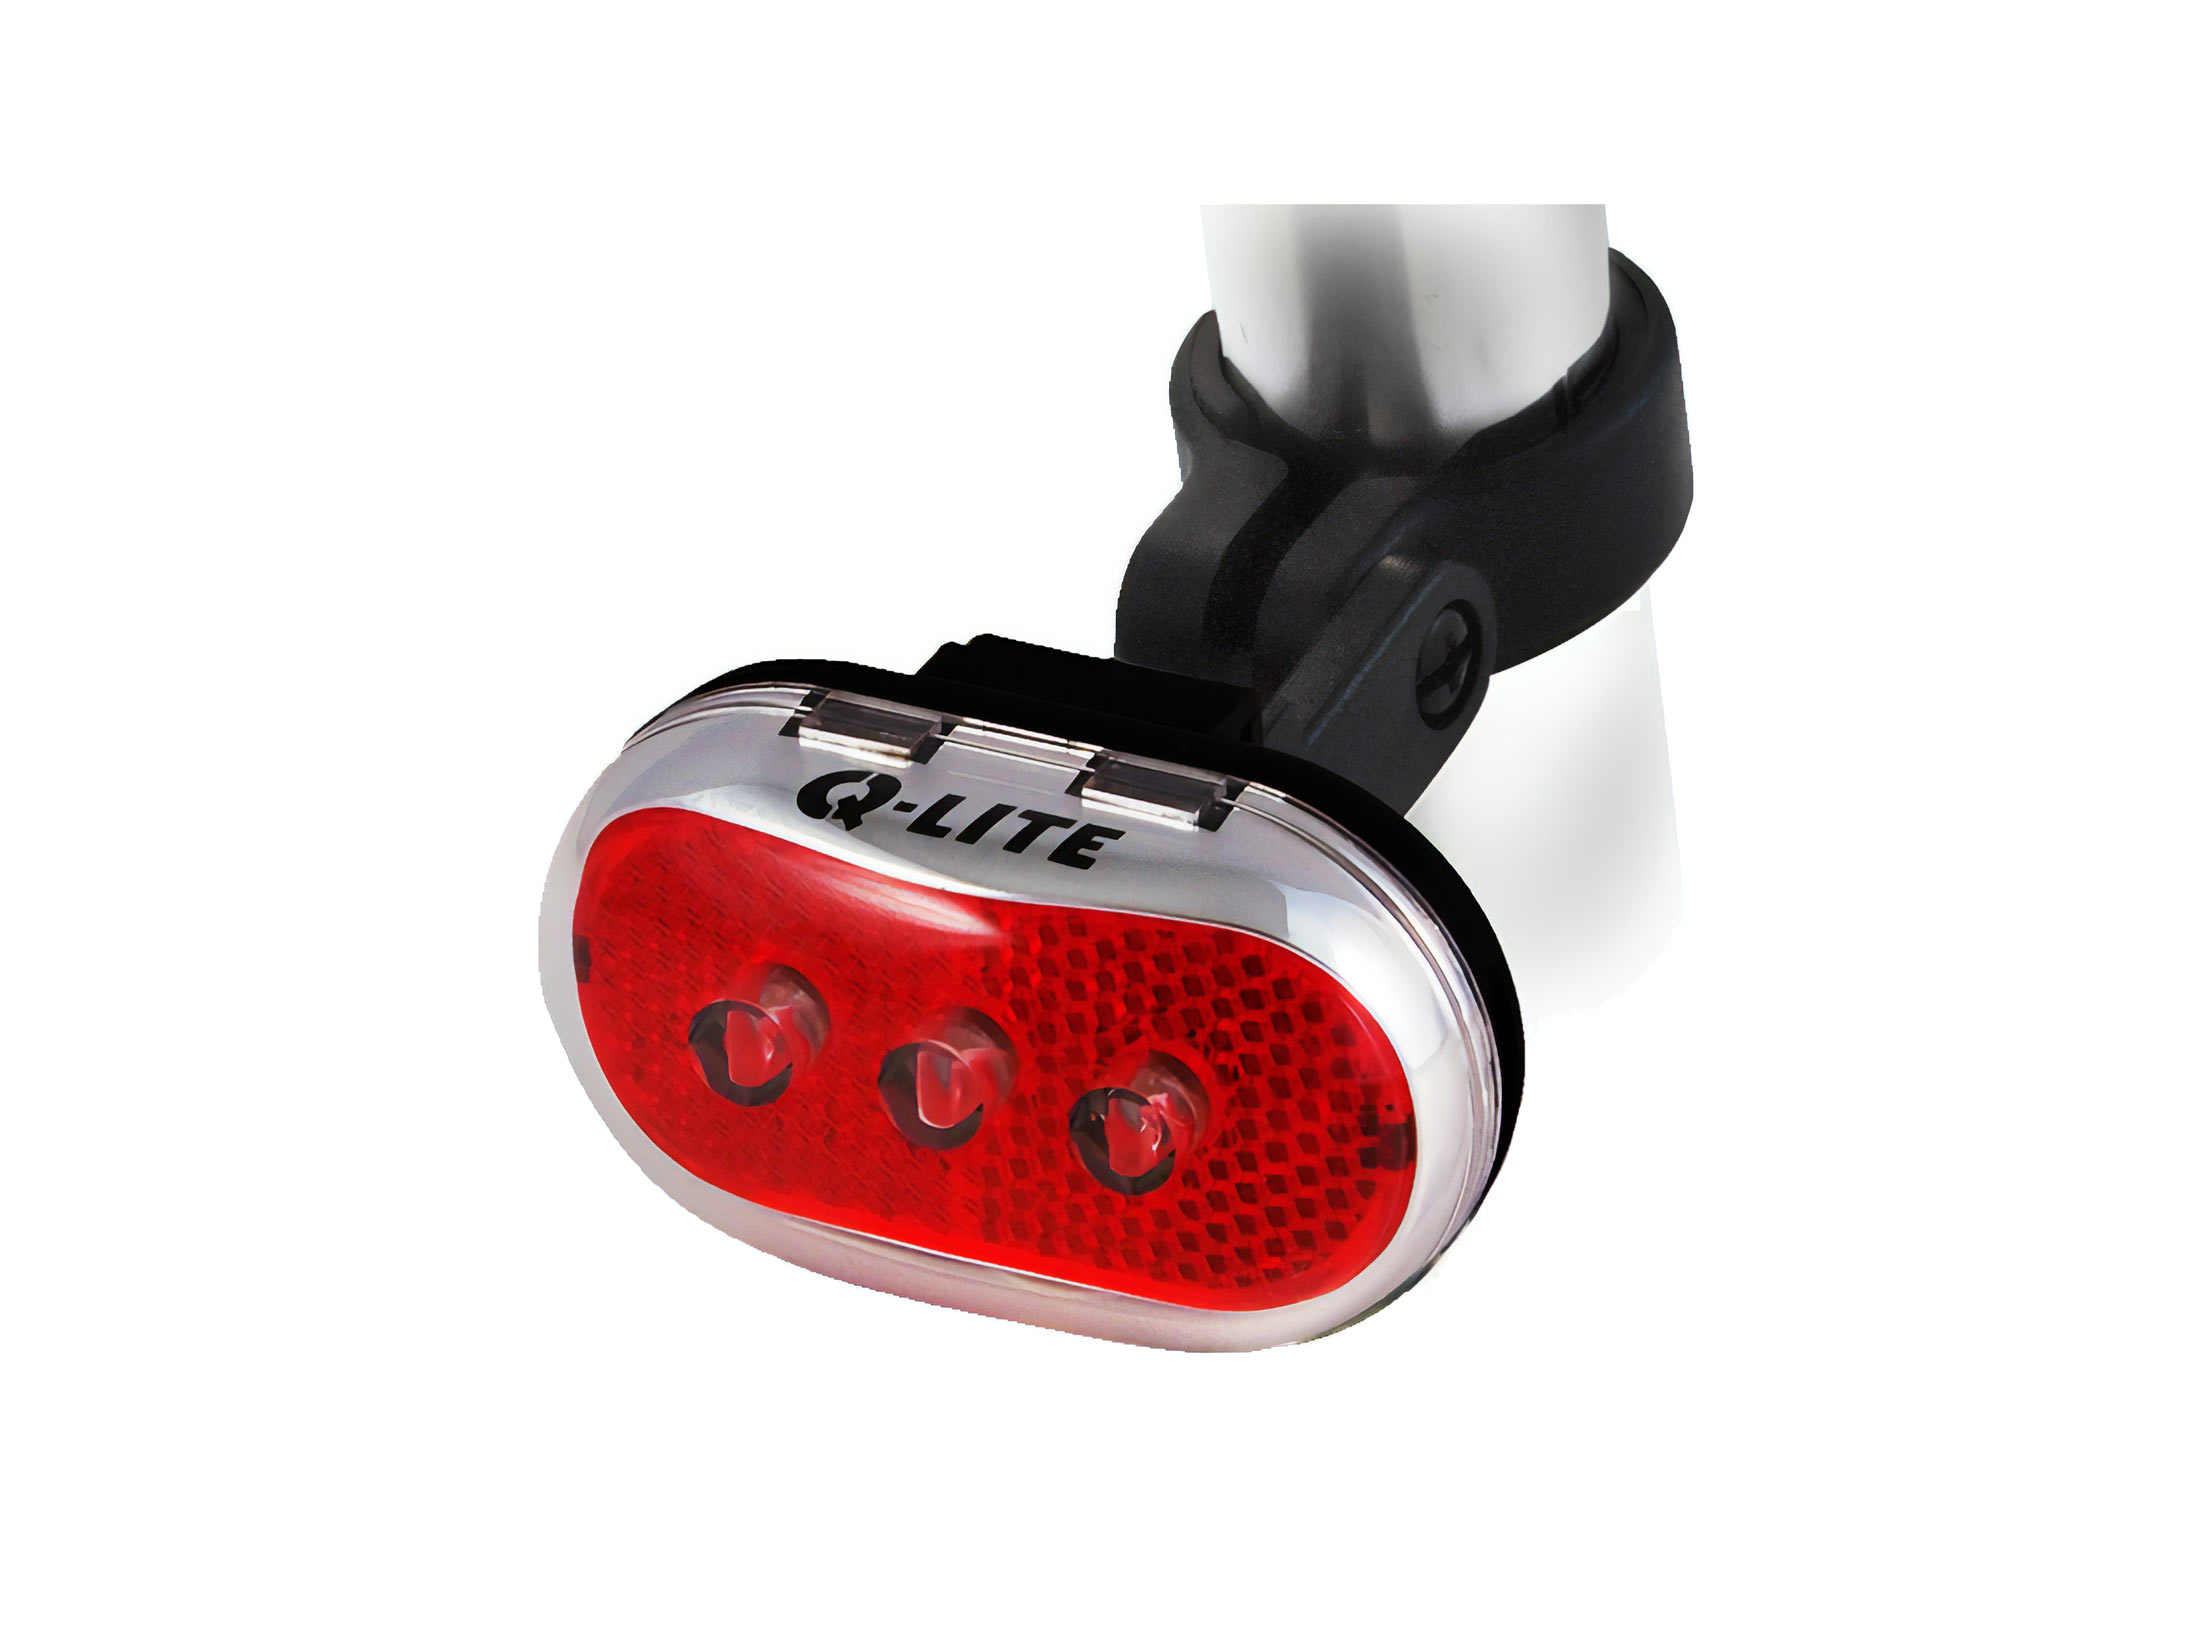 Q-Lite Show 3 Red LED Rear Bicycle Light